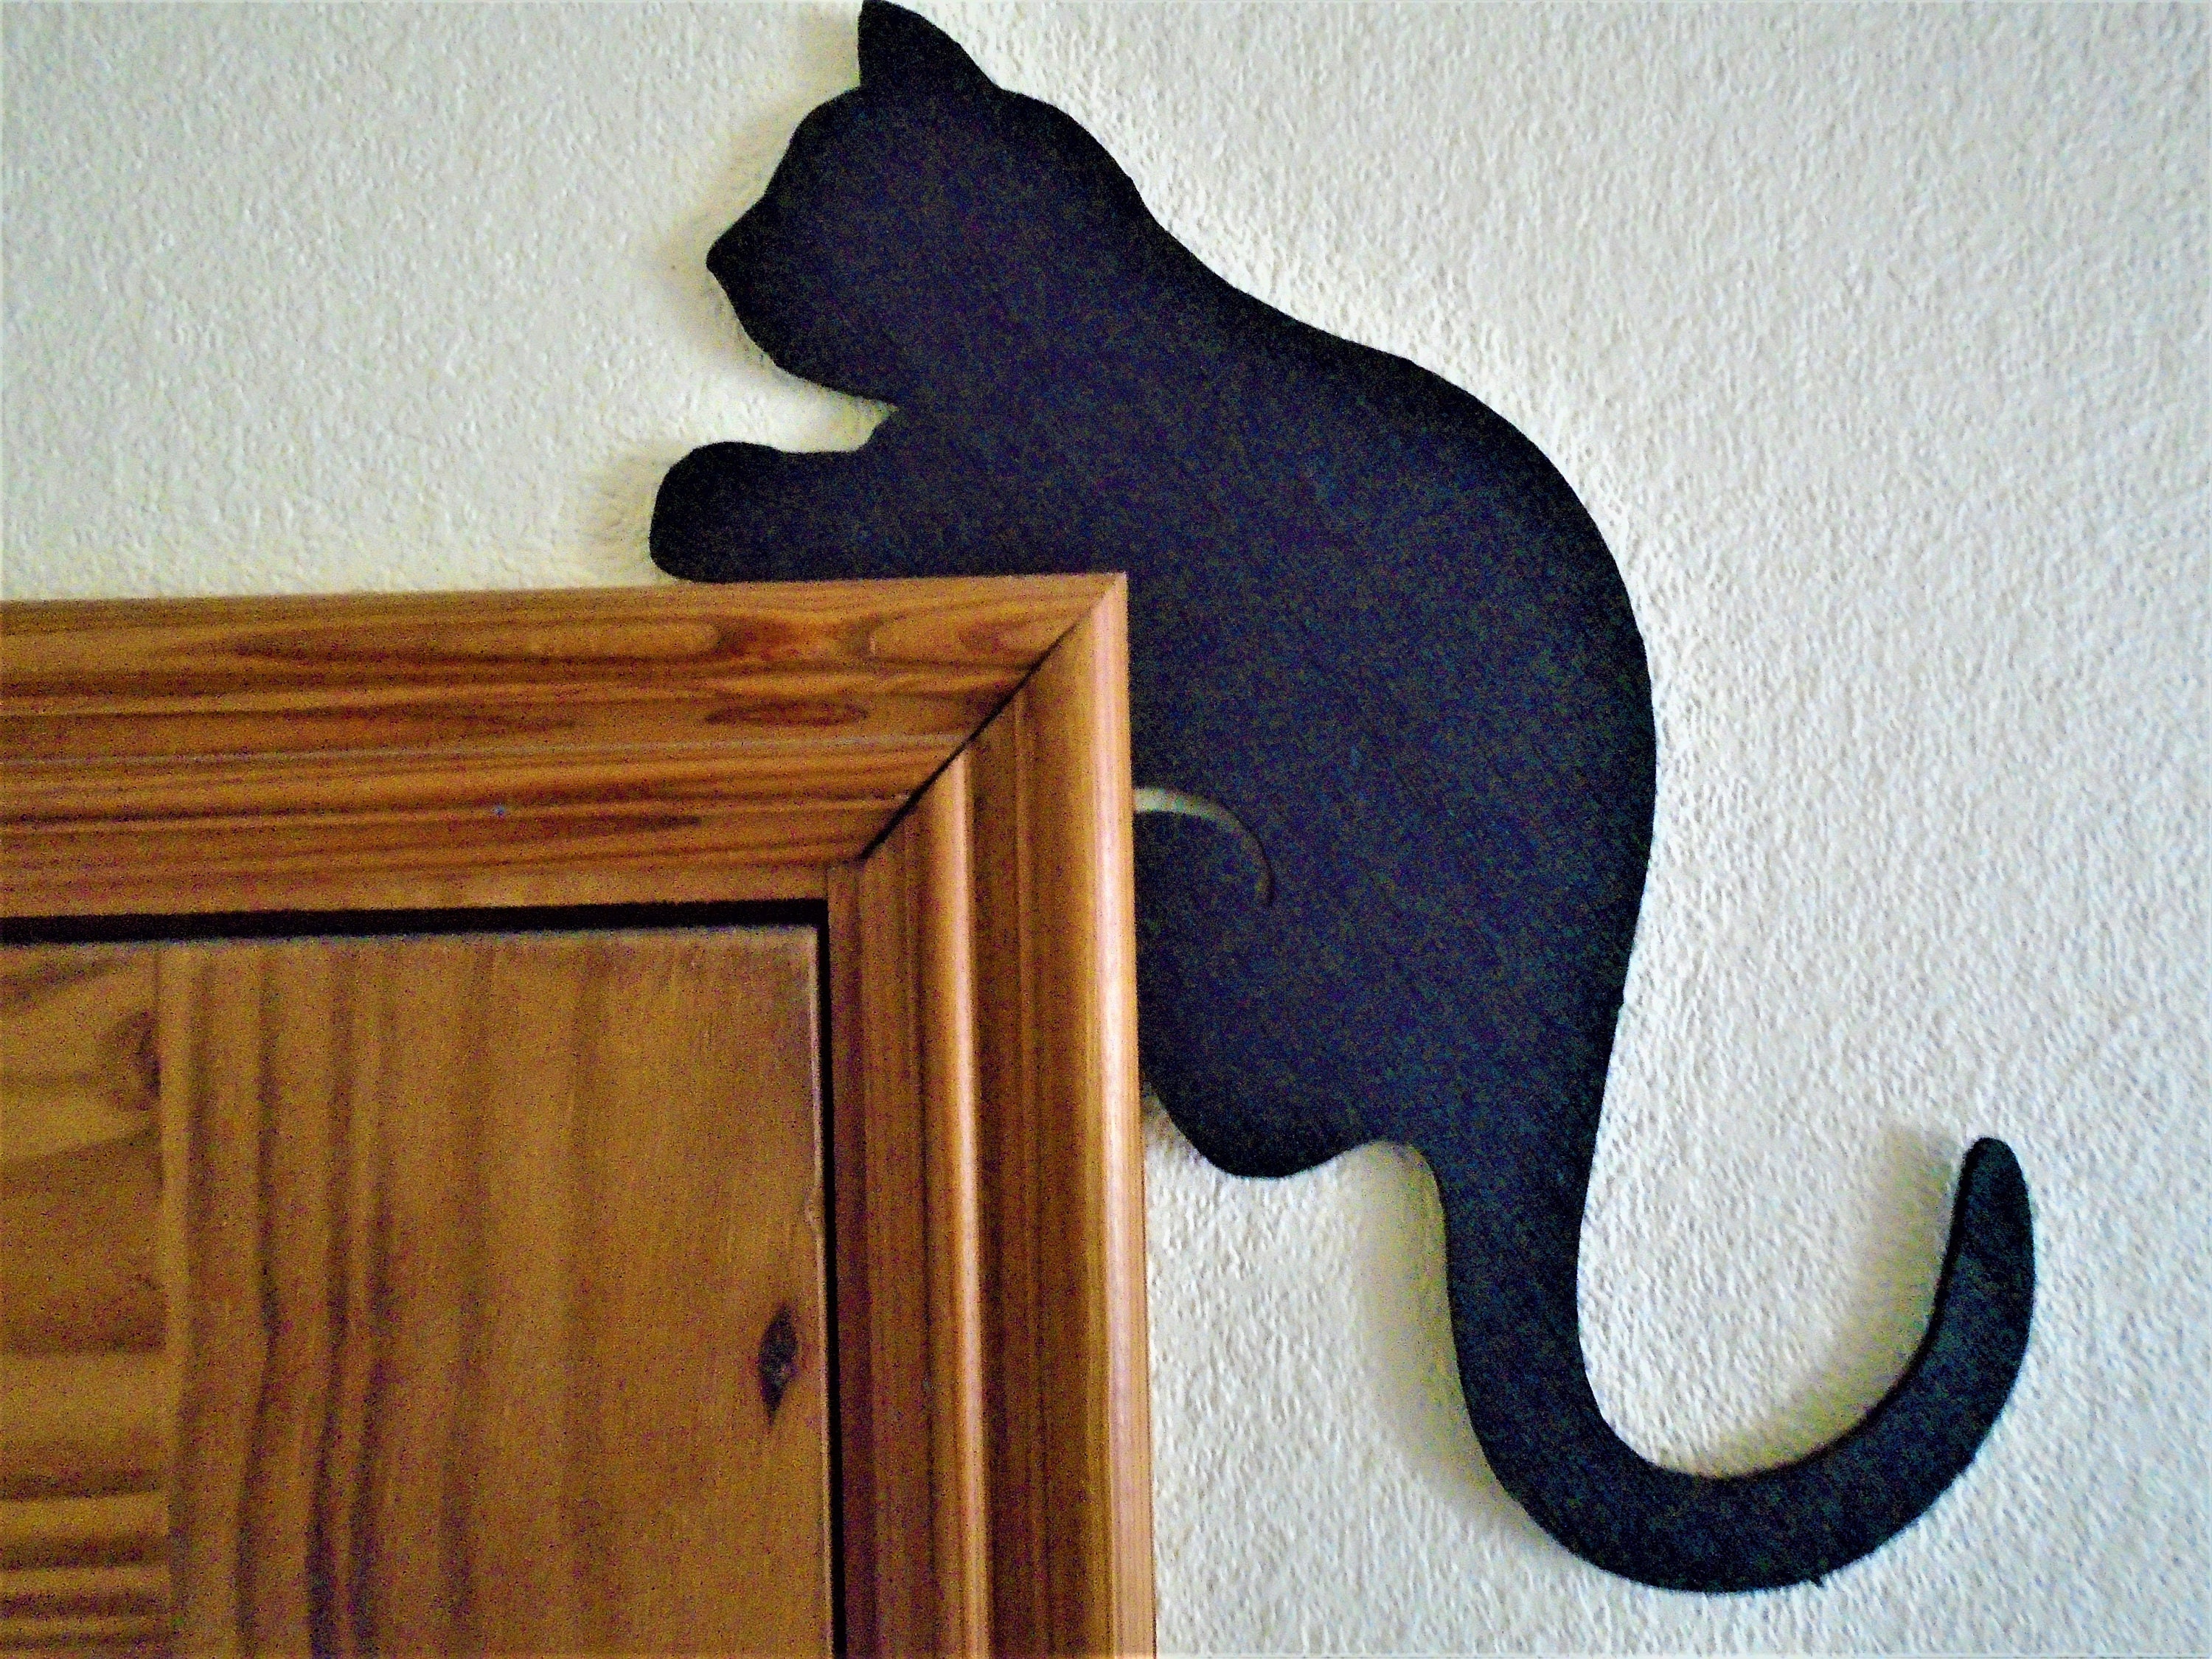 Door Frame or Picture Frame Black Cat Door Topper Topper Frame Black Cat Silhouette best gift for cat owners mdf decor wall For her